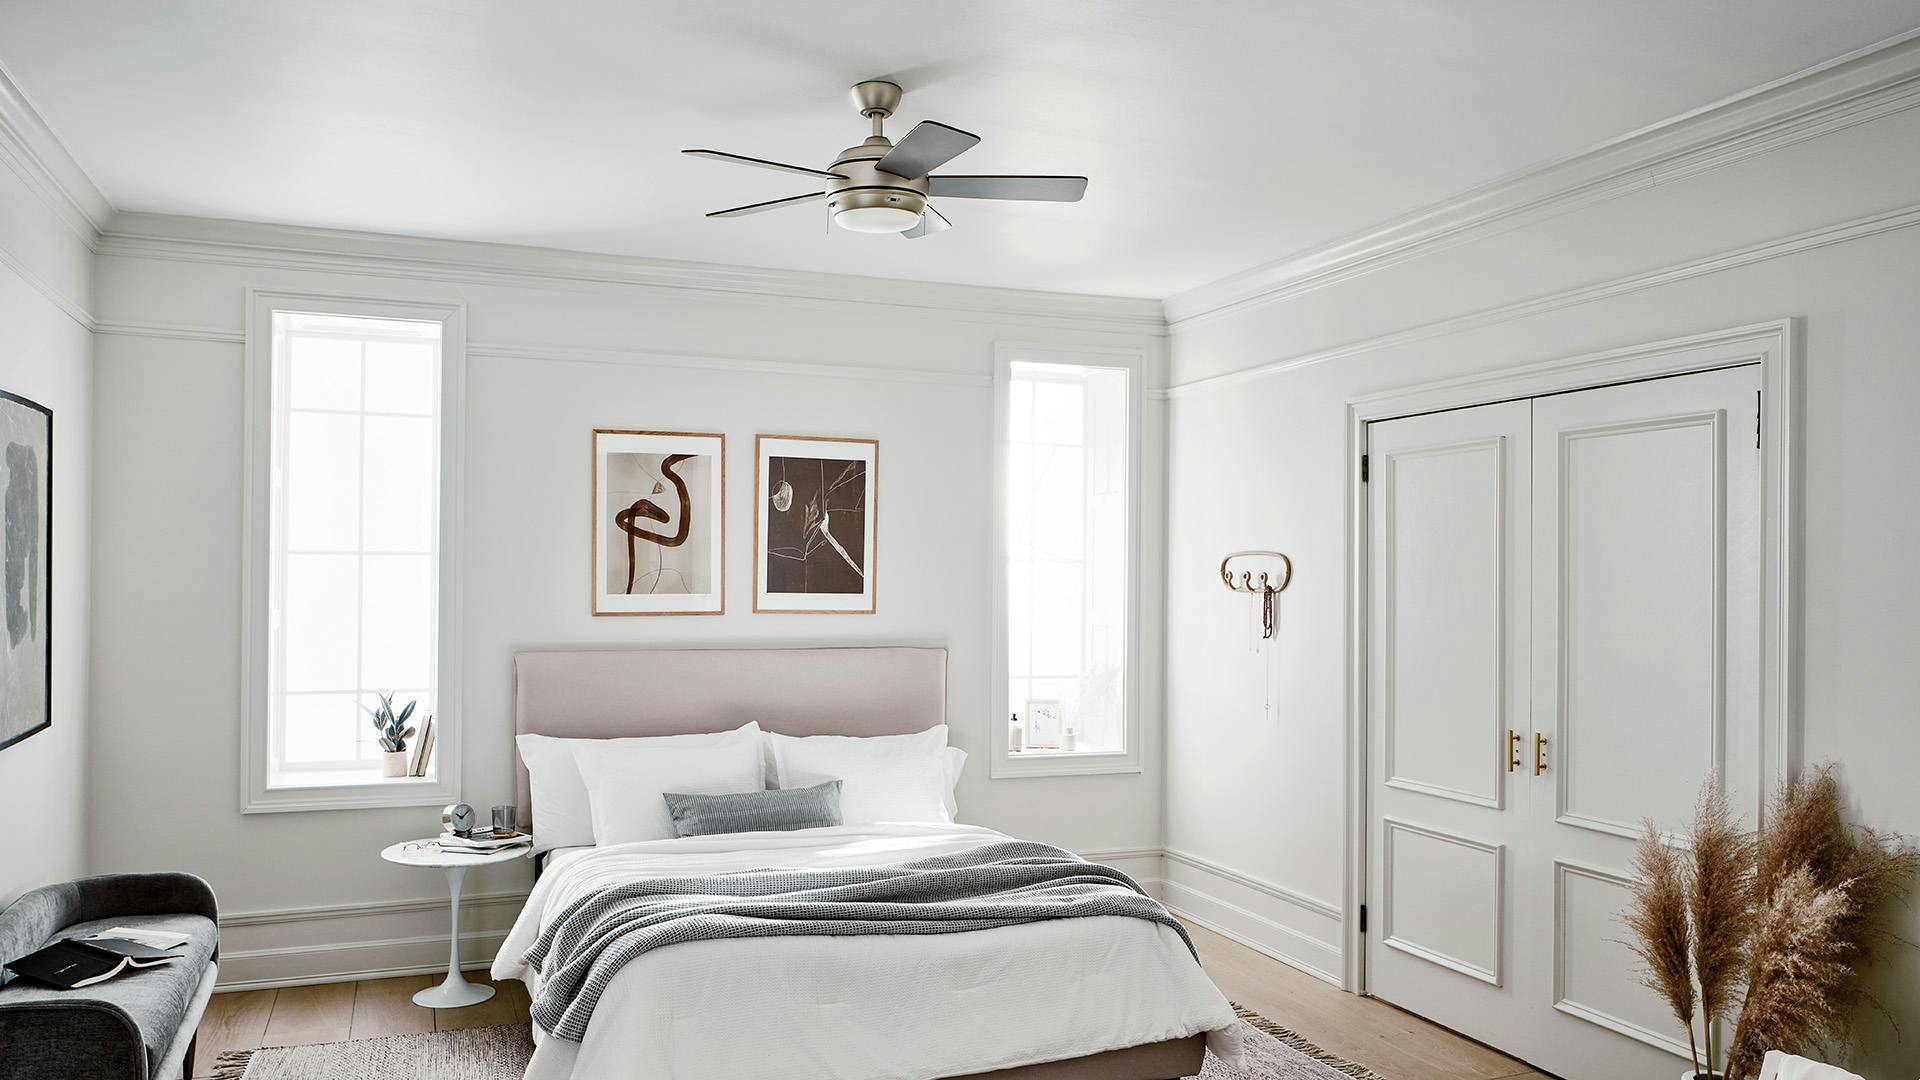 Bright, white bedroom featuring Starkk fan over the bed.